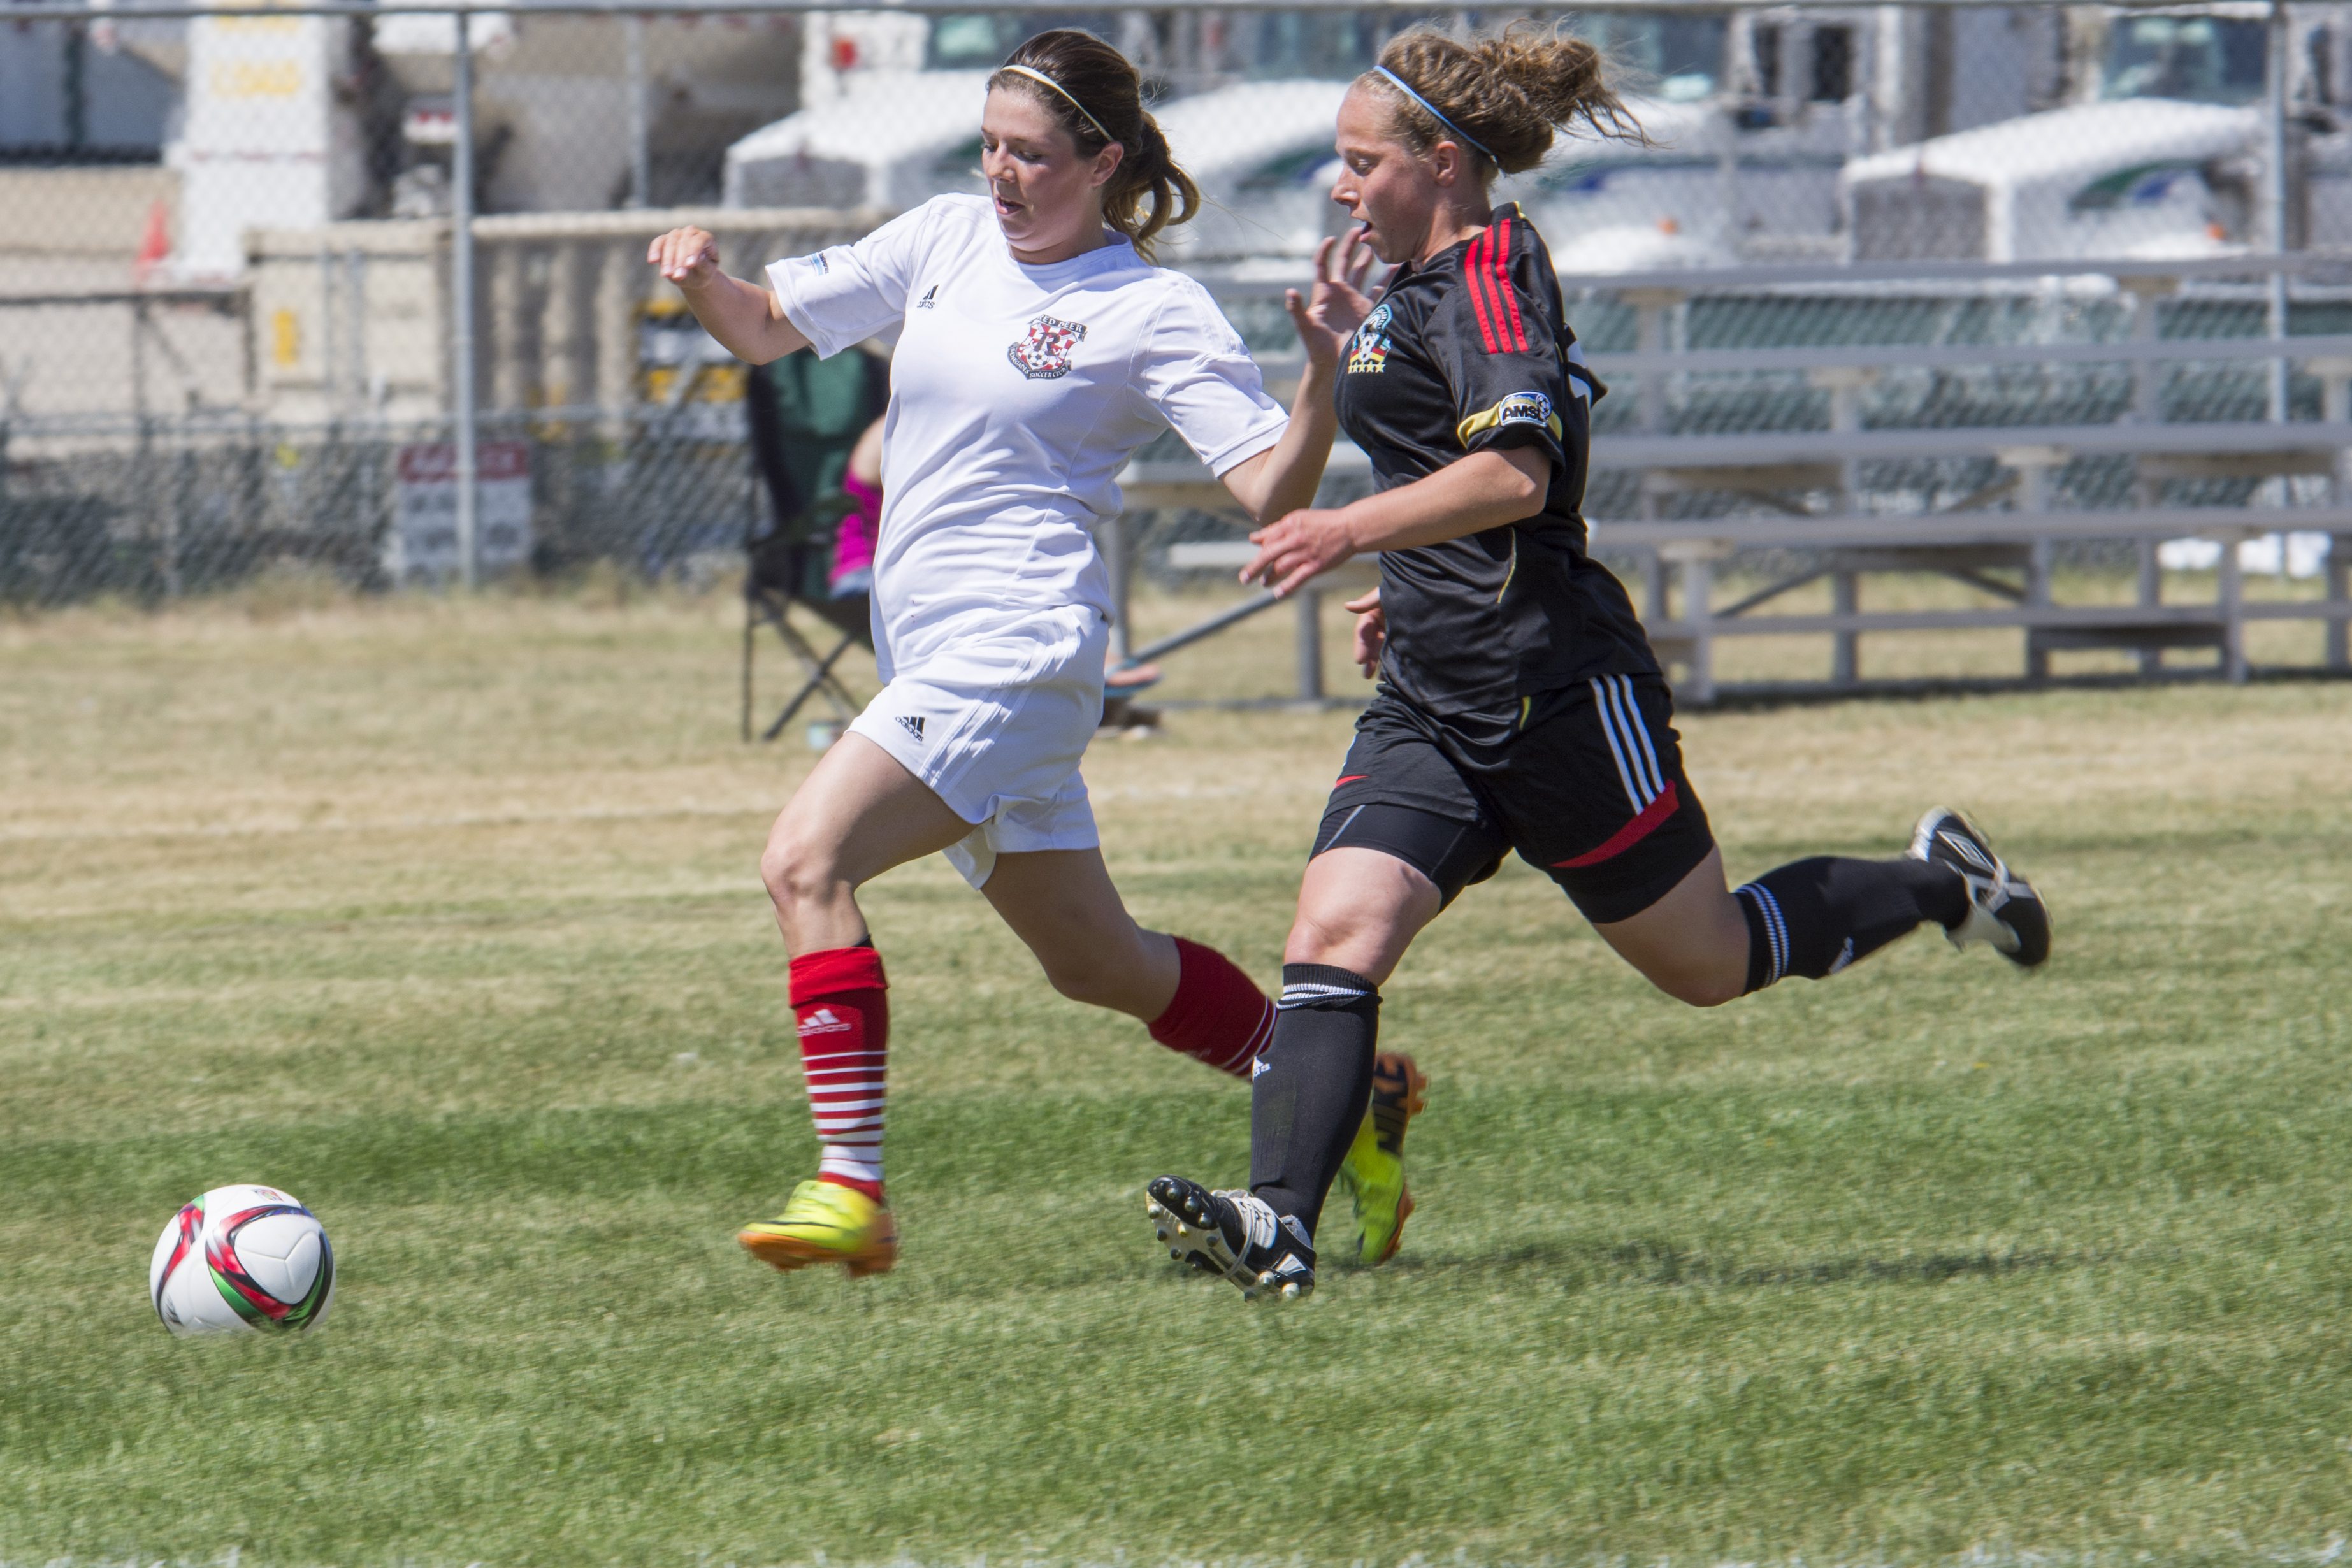 TOUGH LOSS – Red Deer Renegades Kayla Blacquiere pushes the ball up the field in a match on Sunday in Red Deer against the Victoria Soccer Club out of Edmonton.